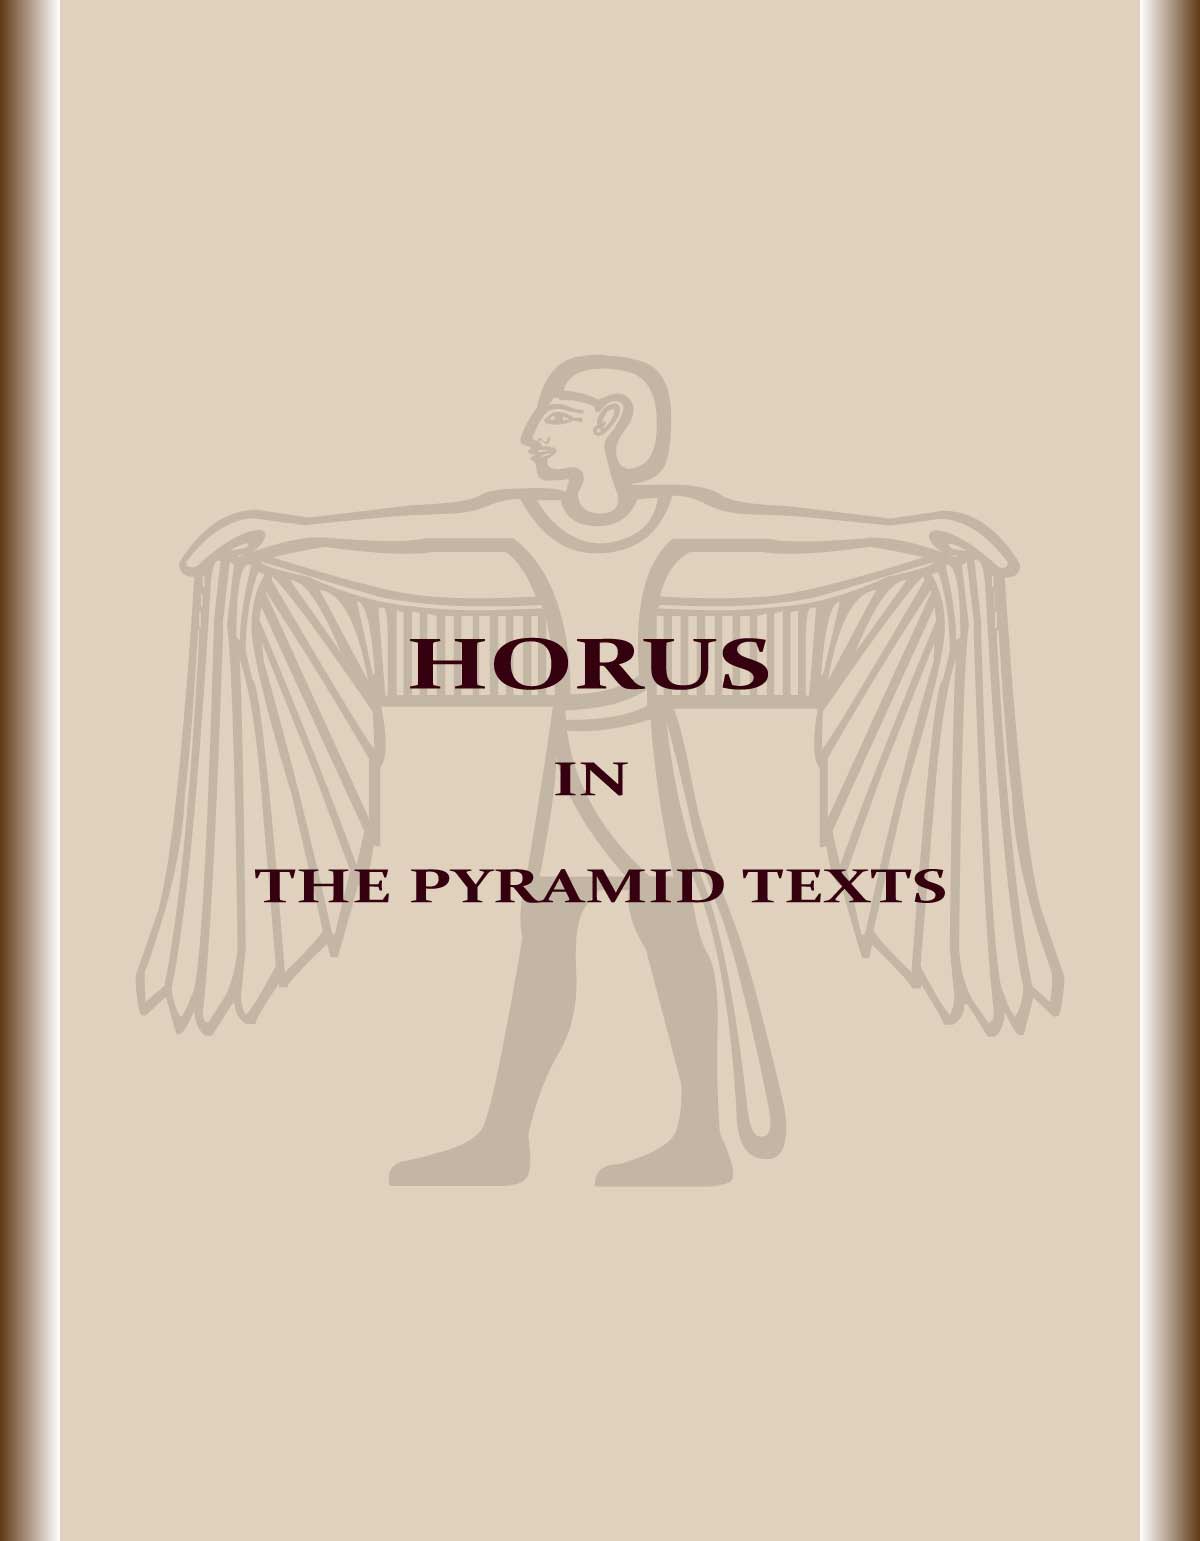 Horus-In-The-Pyramid-Texts-book-cover